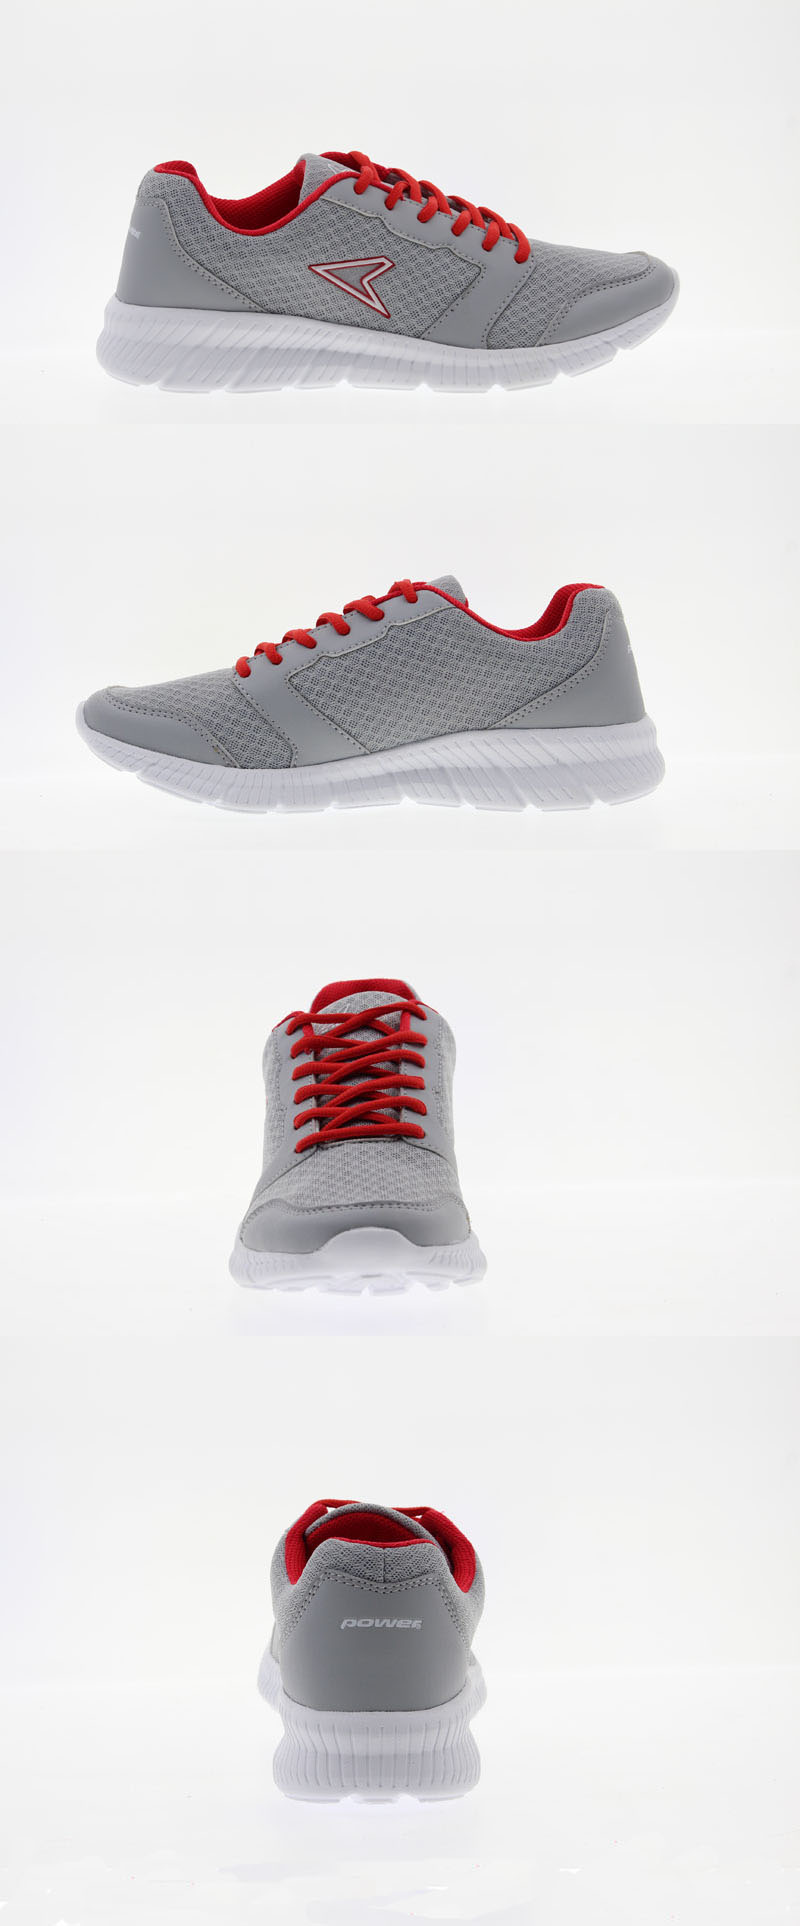 Grey red sandwich mesh shoes